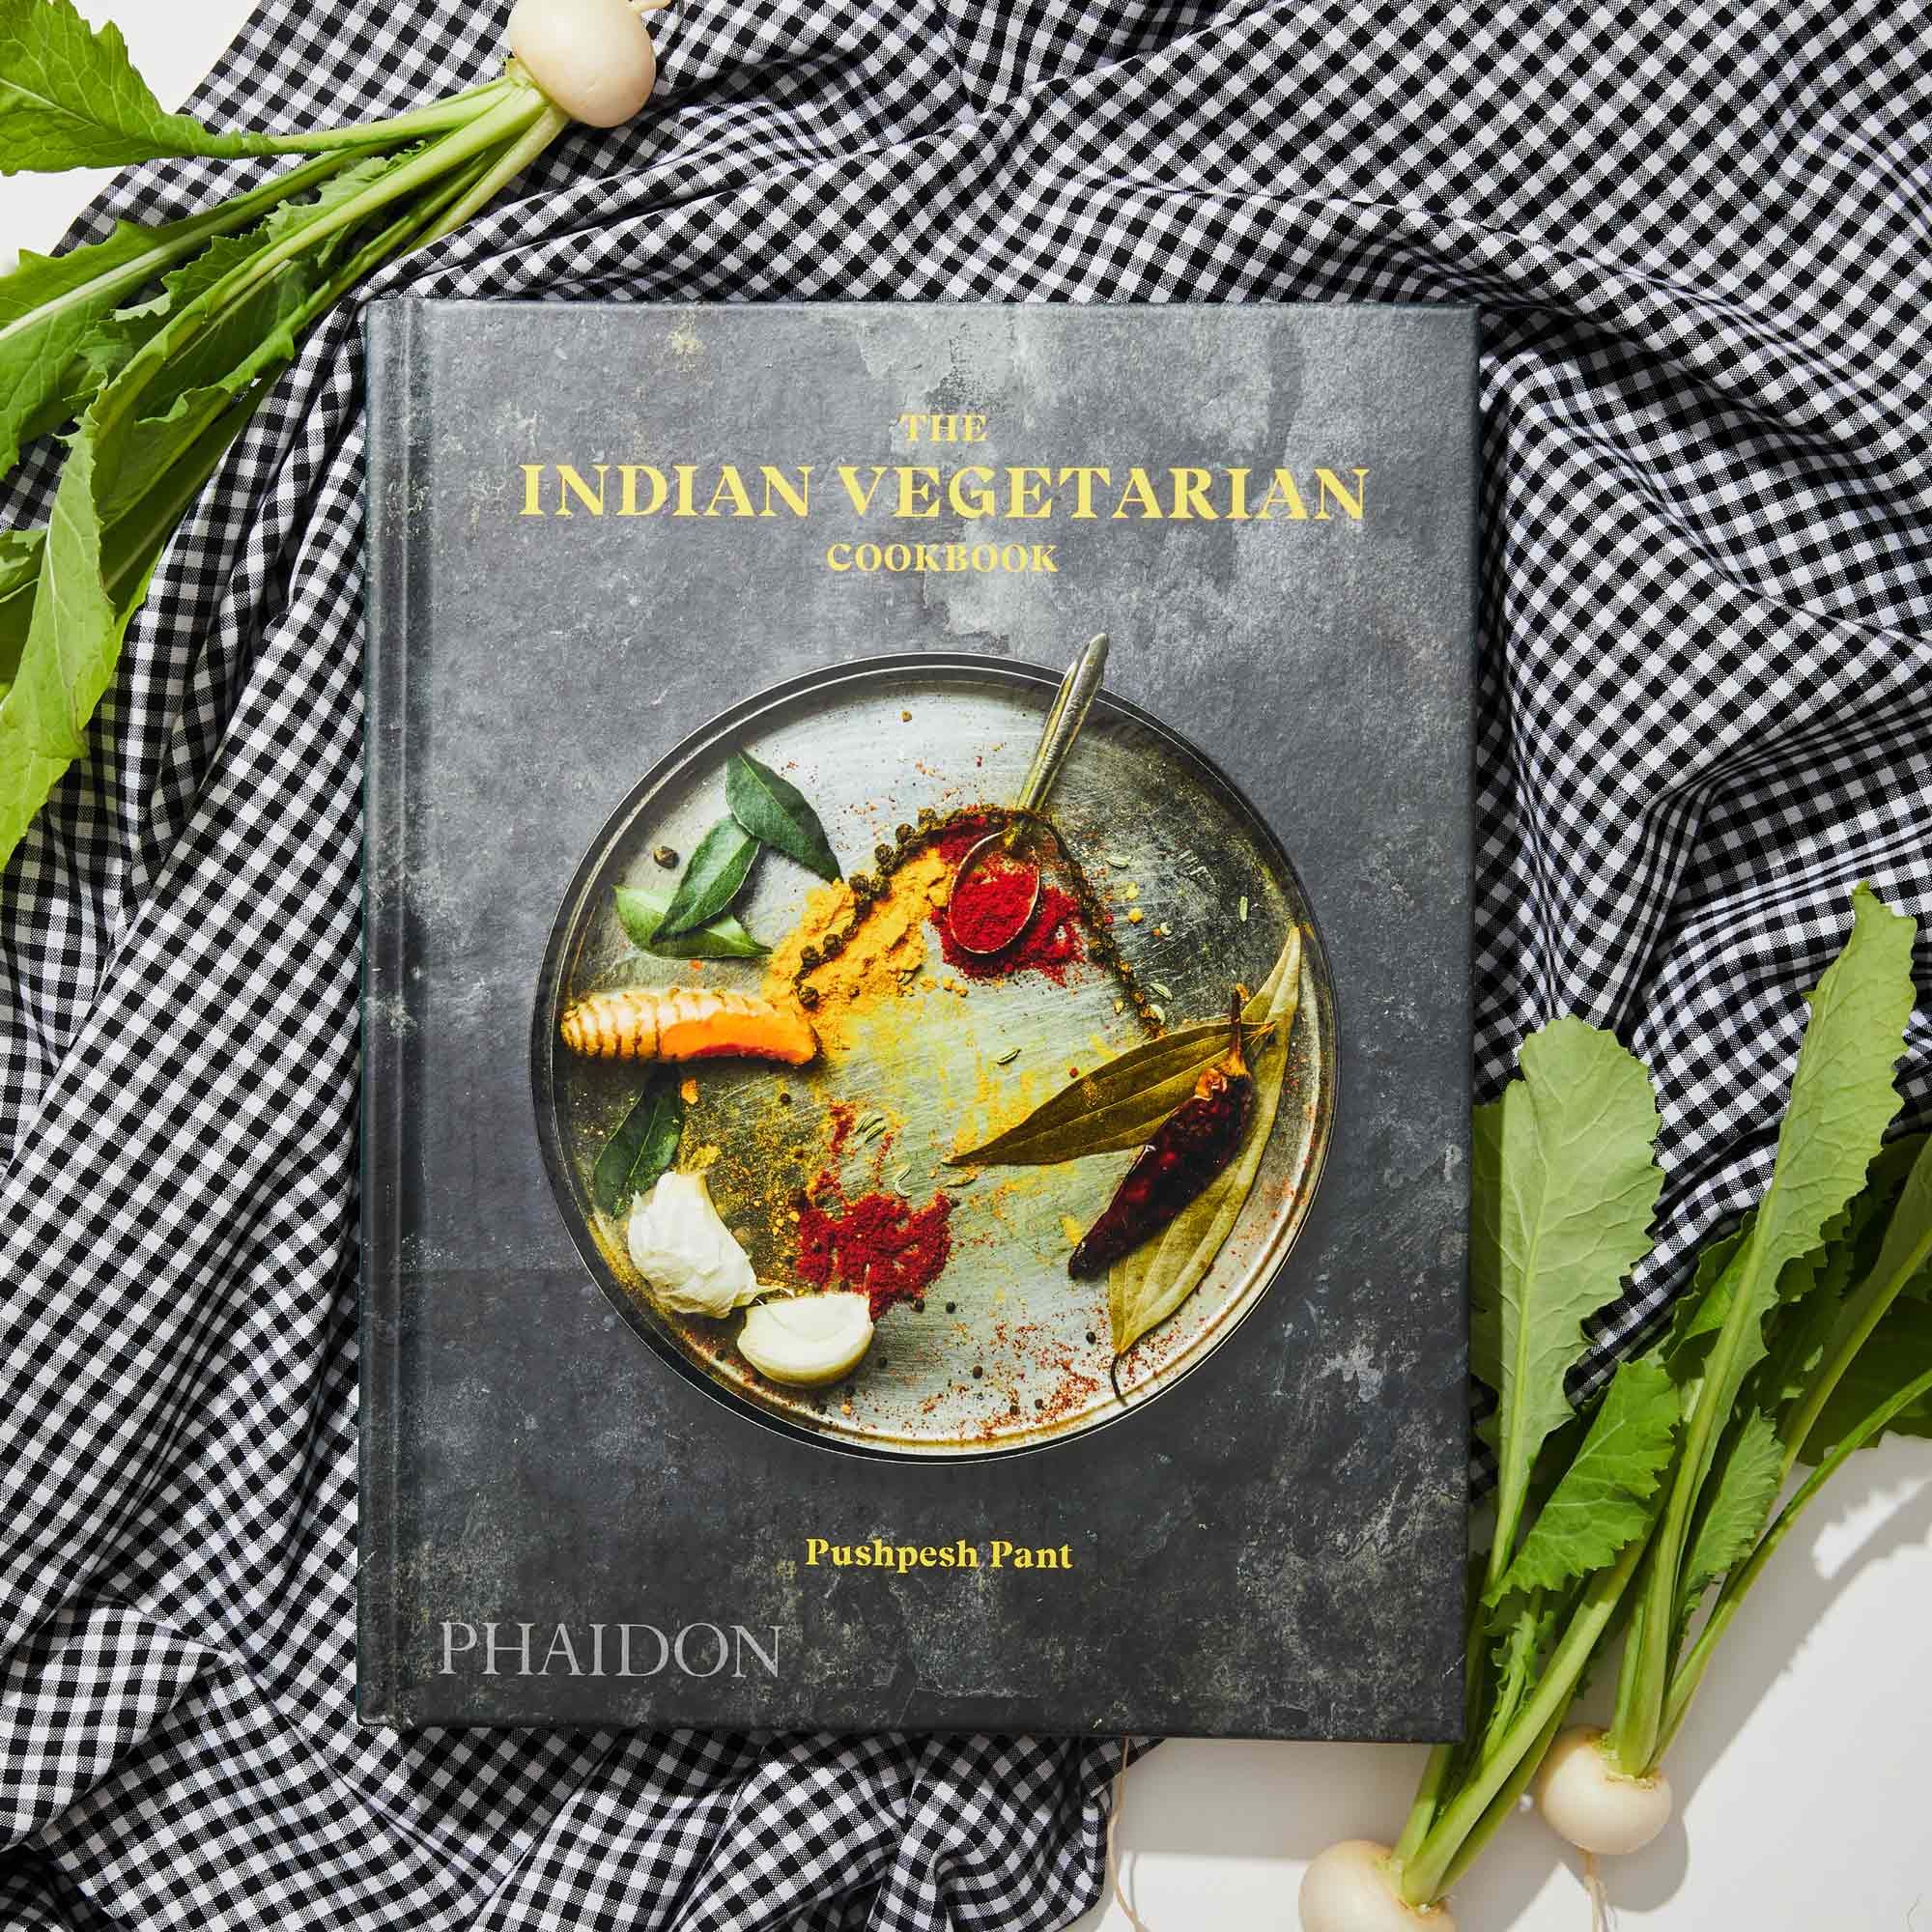 Black and white gingham fabric background, radishes with greens and copy of The Indian Vegetarian by Pushpesh Pant